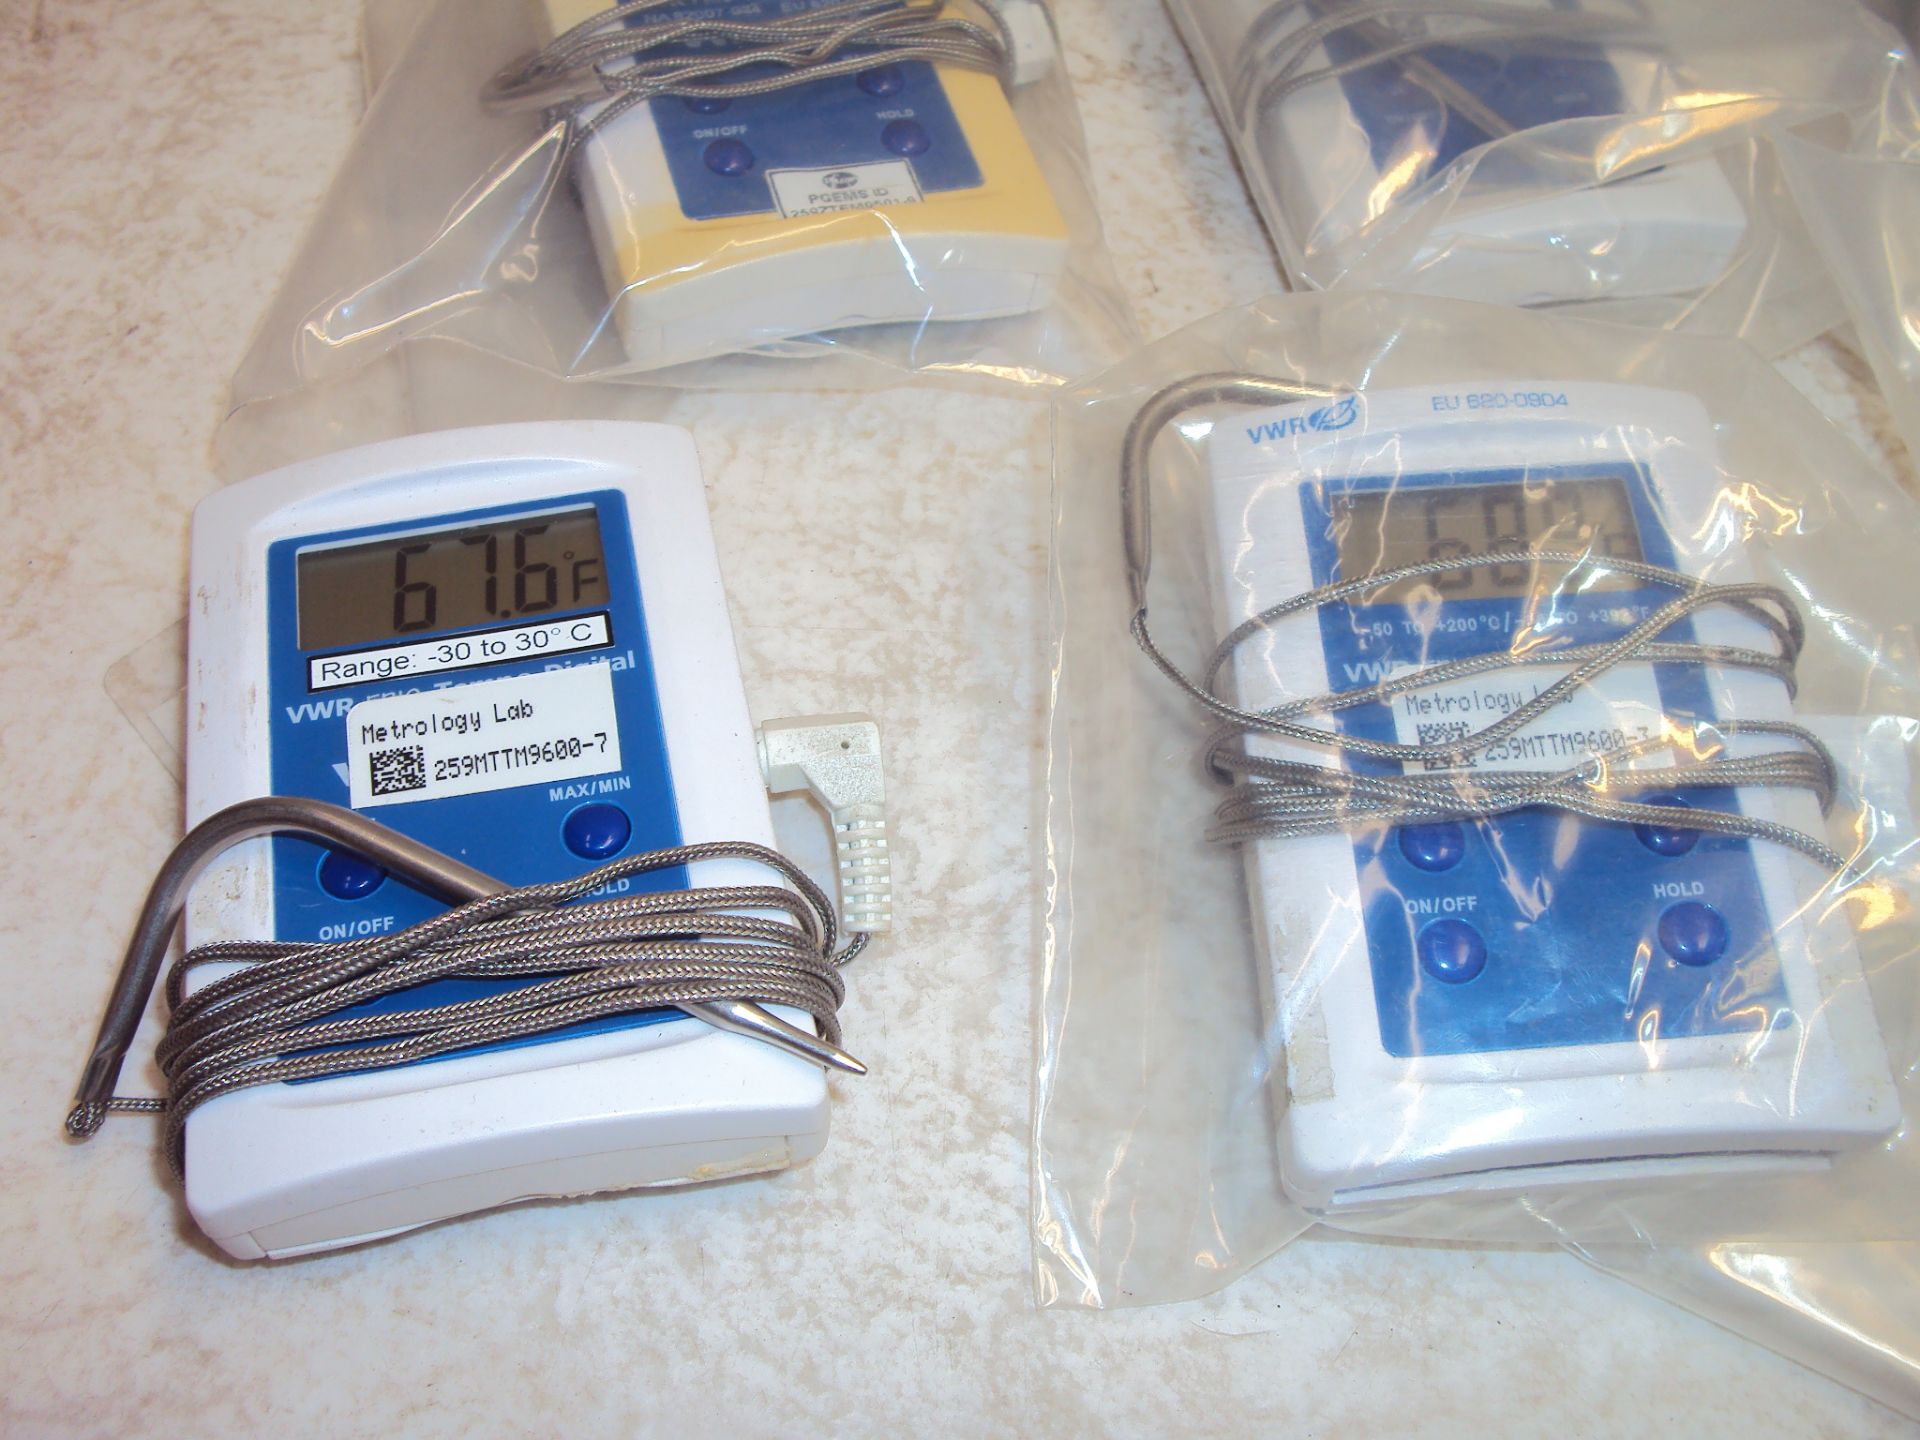 (12) VWR Frio-Temp 82007-984 Temperature Gages w/ Thermocouple - Image 2 of 3